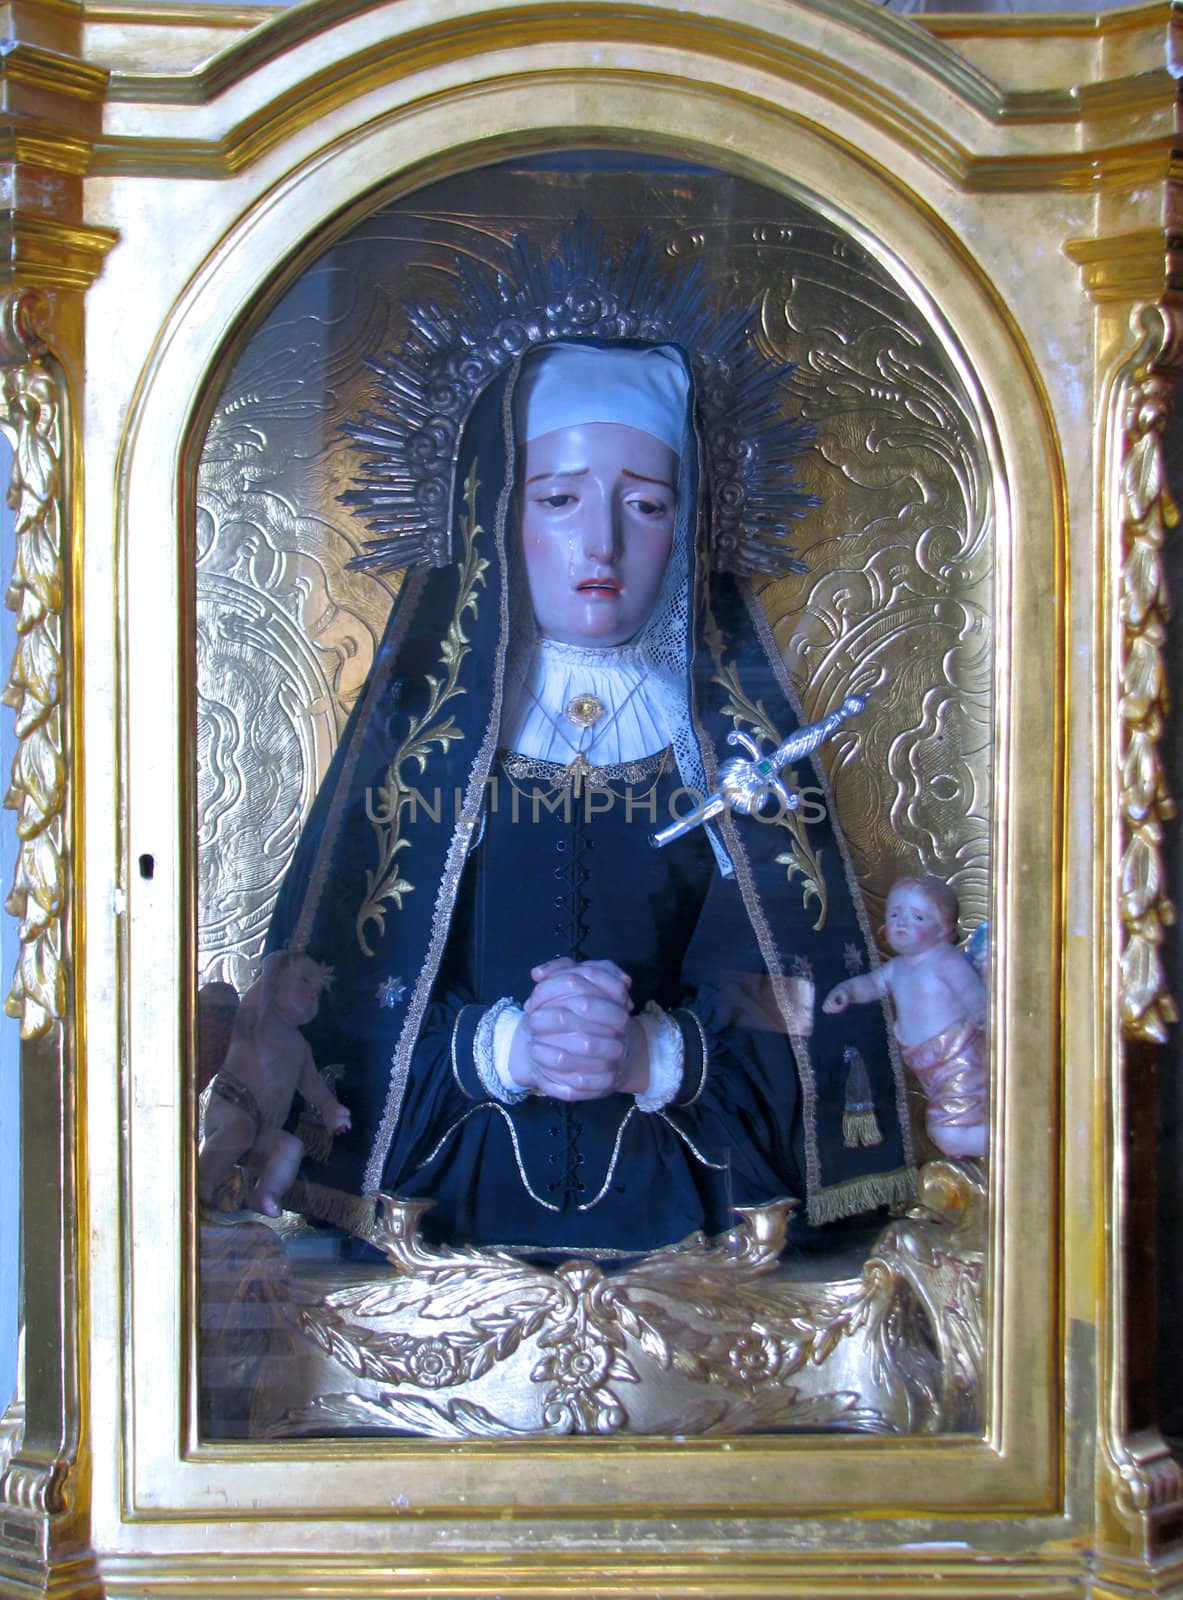 A statue of Our Lady of Sorrows in Vittoriosa, Malta.